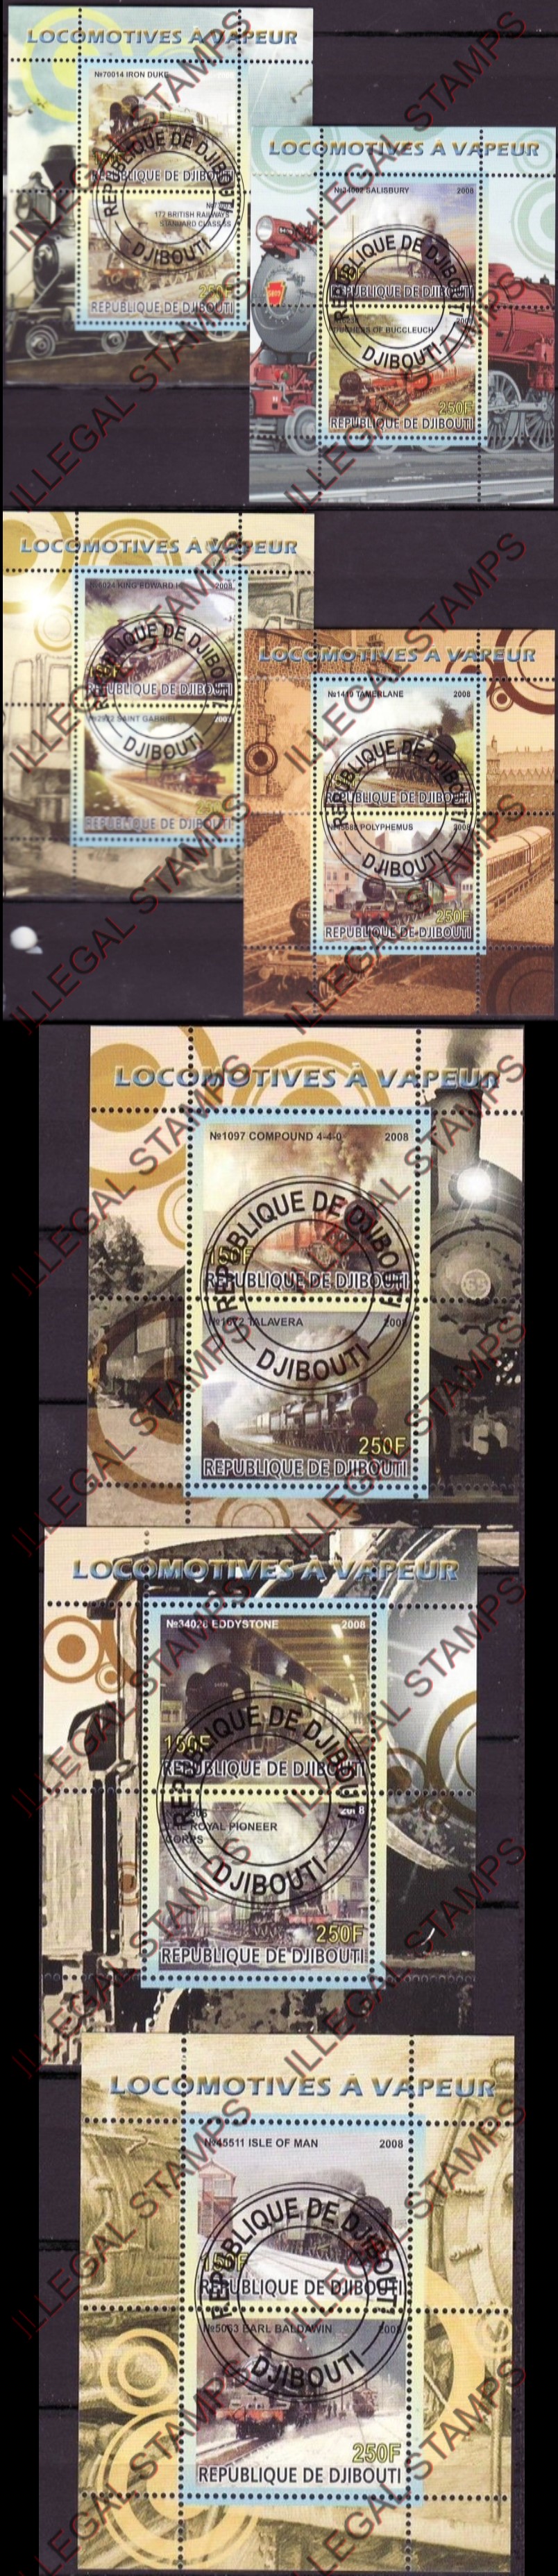 Djibouti 2008 Steam Locomotives Illegal Stamp Souvenir Sheets of 2